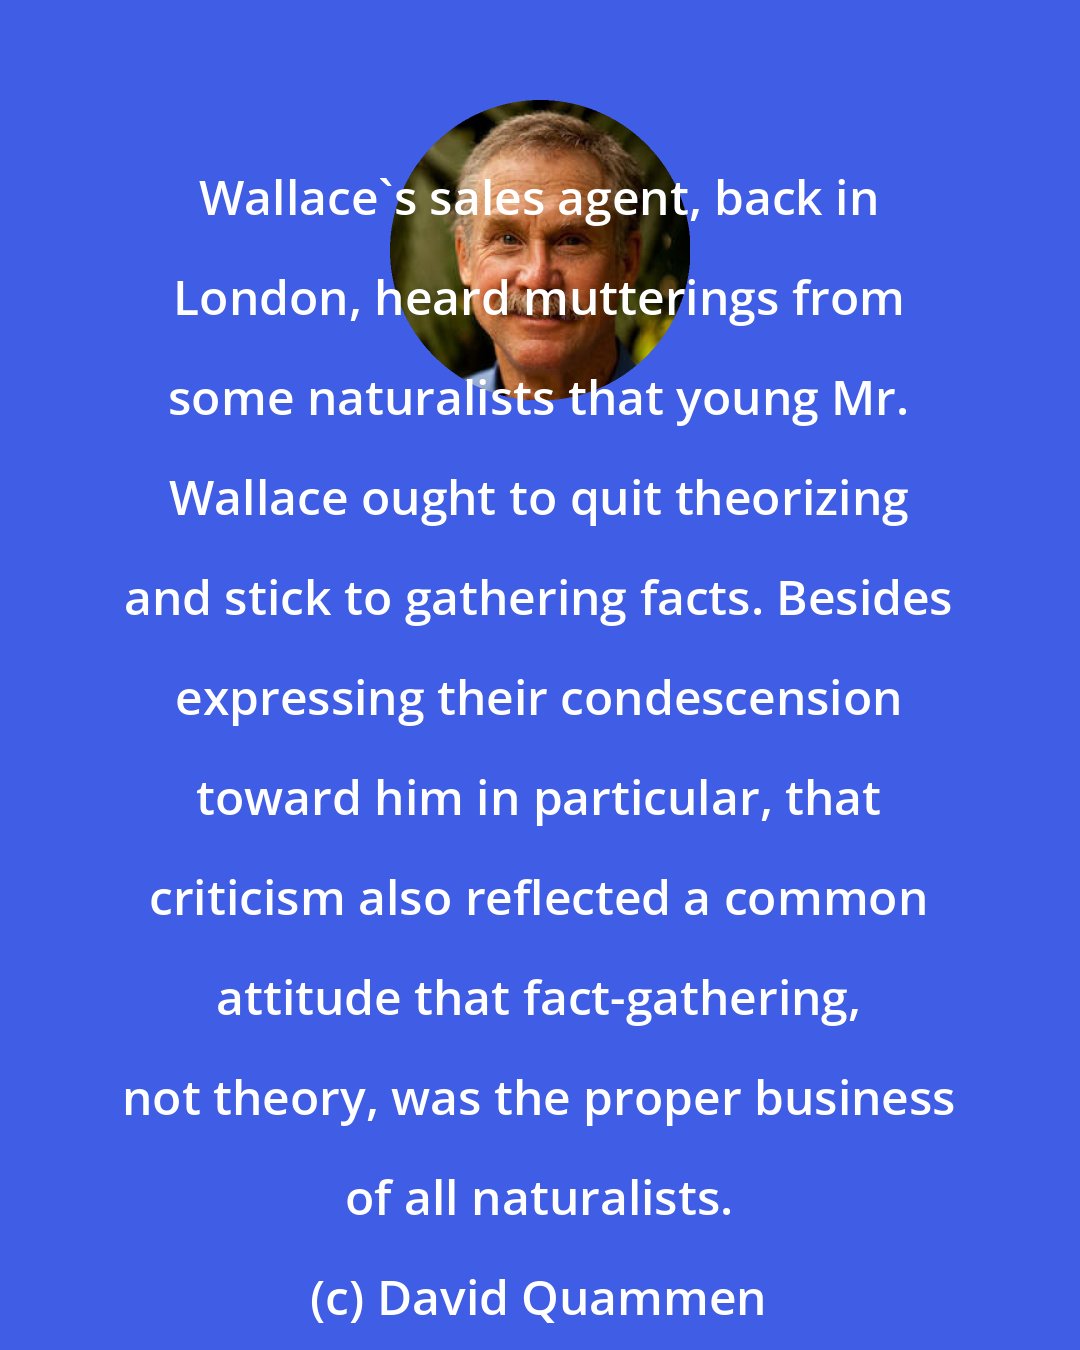 David Quammen: Wallace's sales agent, back in London, heard mutterings from some naturalists that young Mr. Wallace ought to quit theorizing and stick to gathering facts. Besides expressing their condescension toward him in particular, that criticism also reflected a common attitude that fact-gathering, not theory, was the proper business of all naturalists.